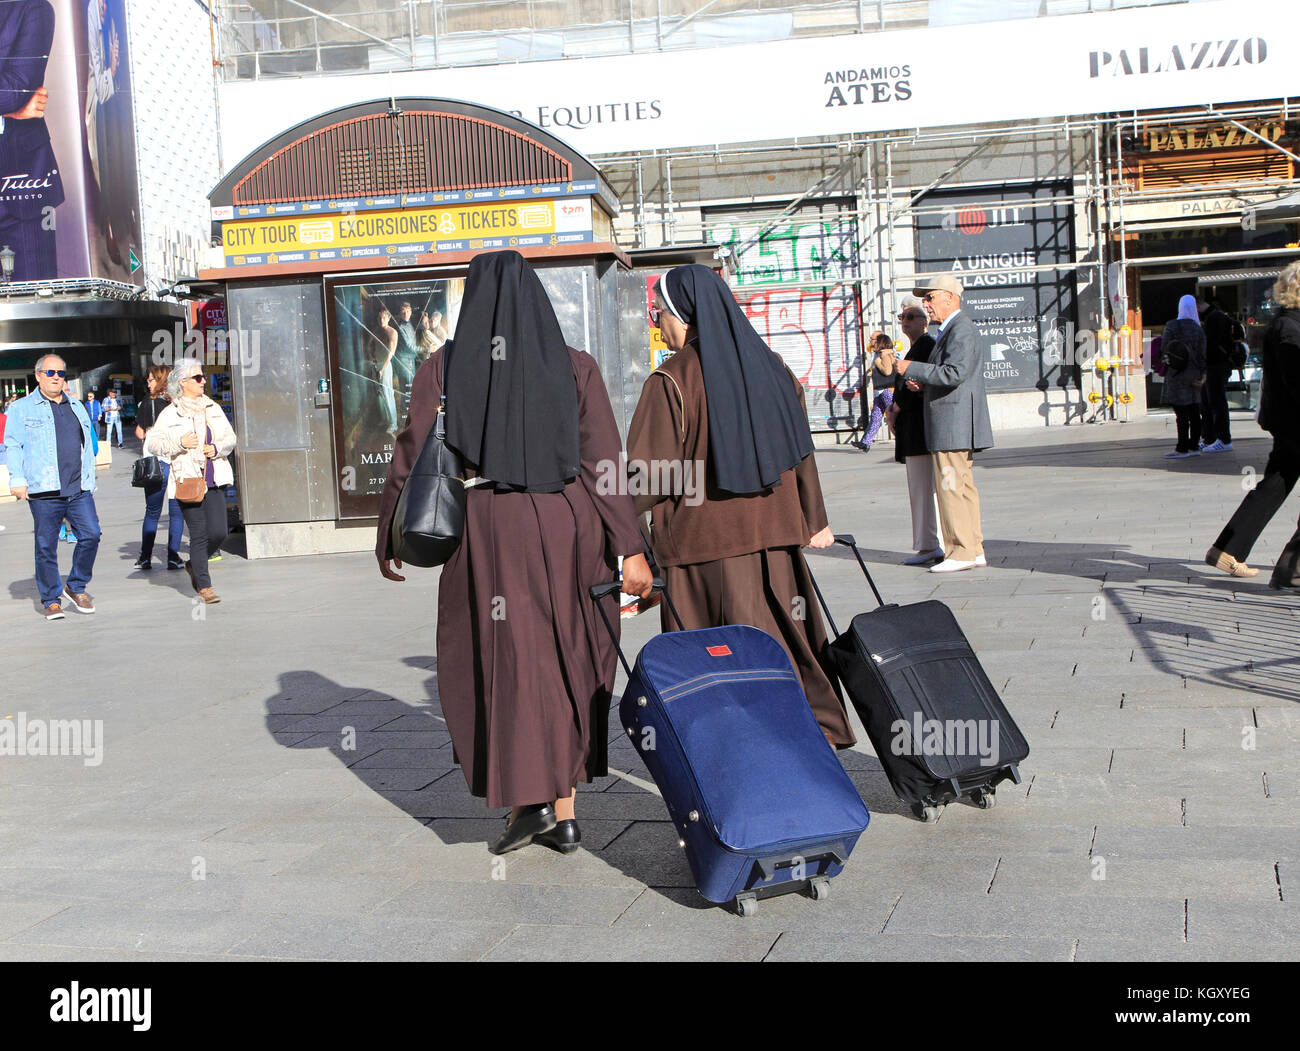 Two nuns wearing brown habits each pulling a suitcase in Madrid city centre, Spain Stock Photo